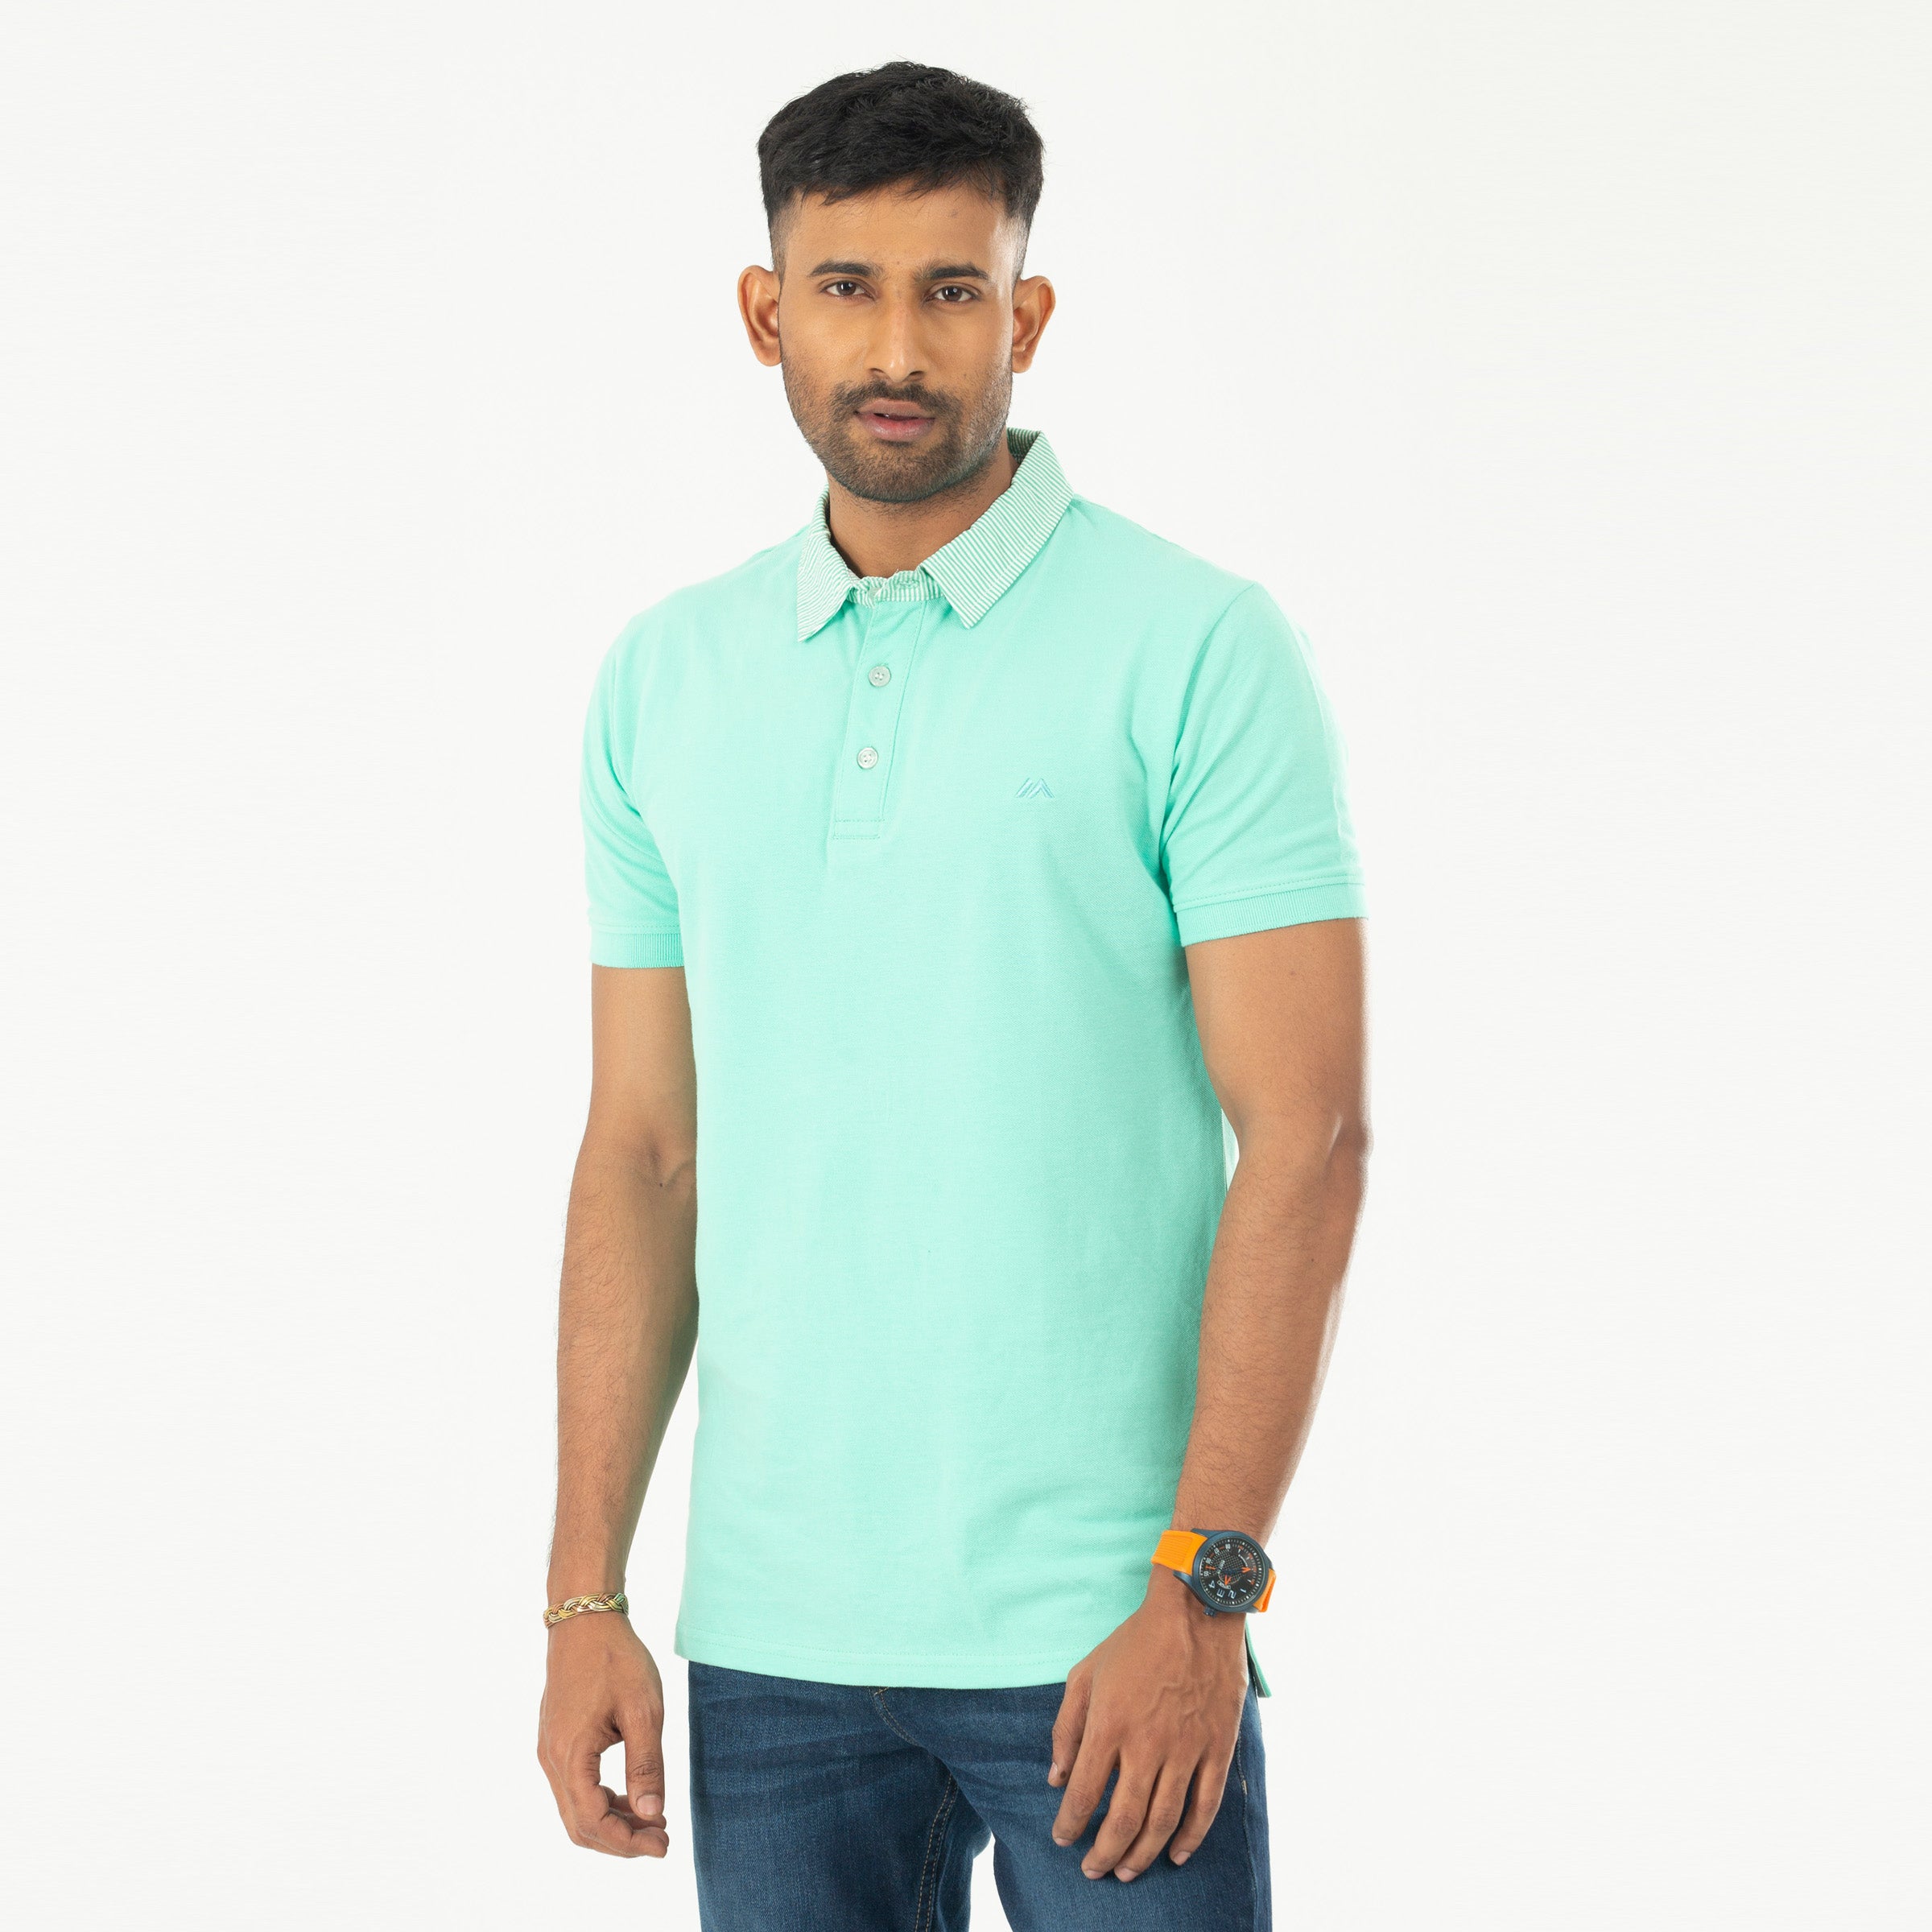 Woven Collar Contrast Solid Polo - Turquoise